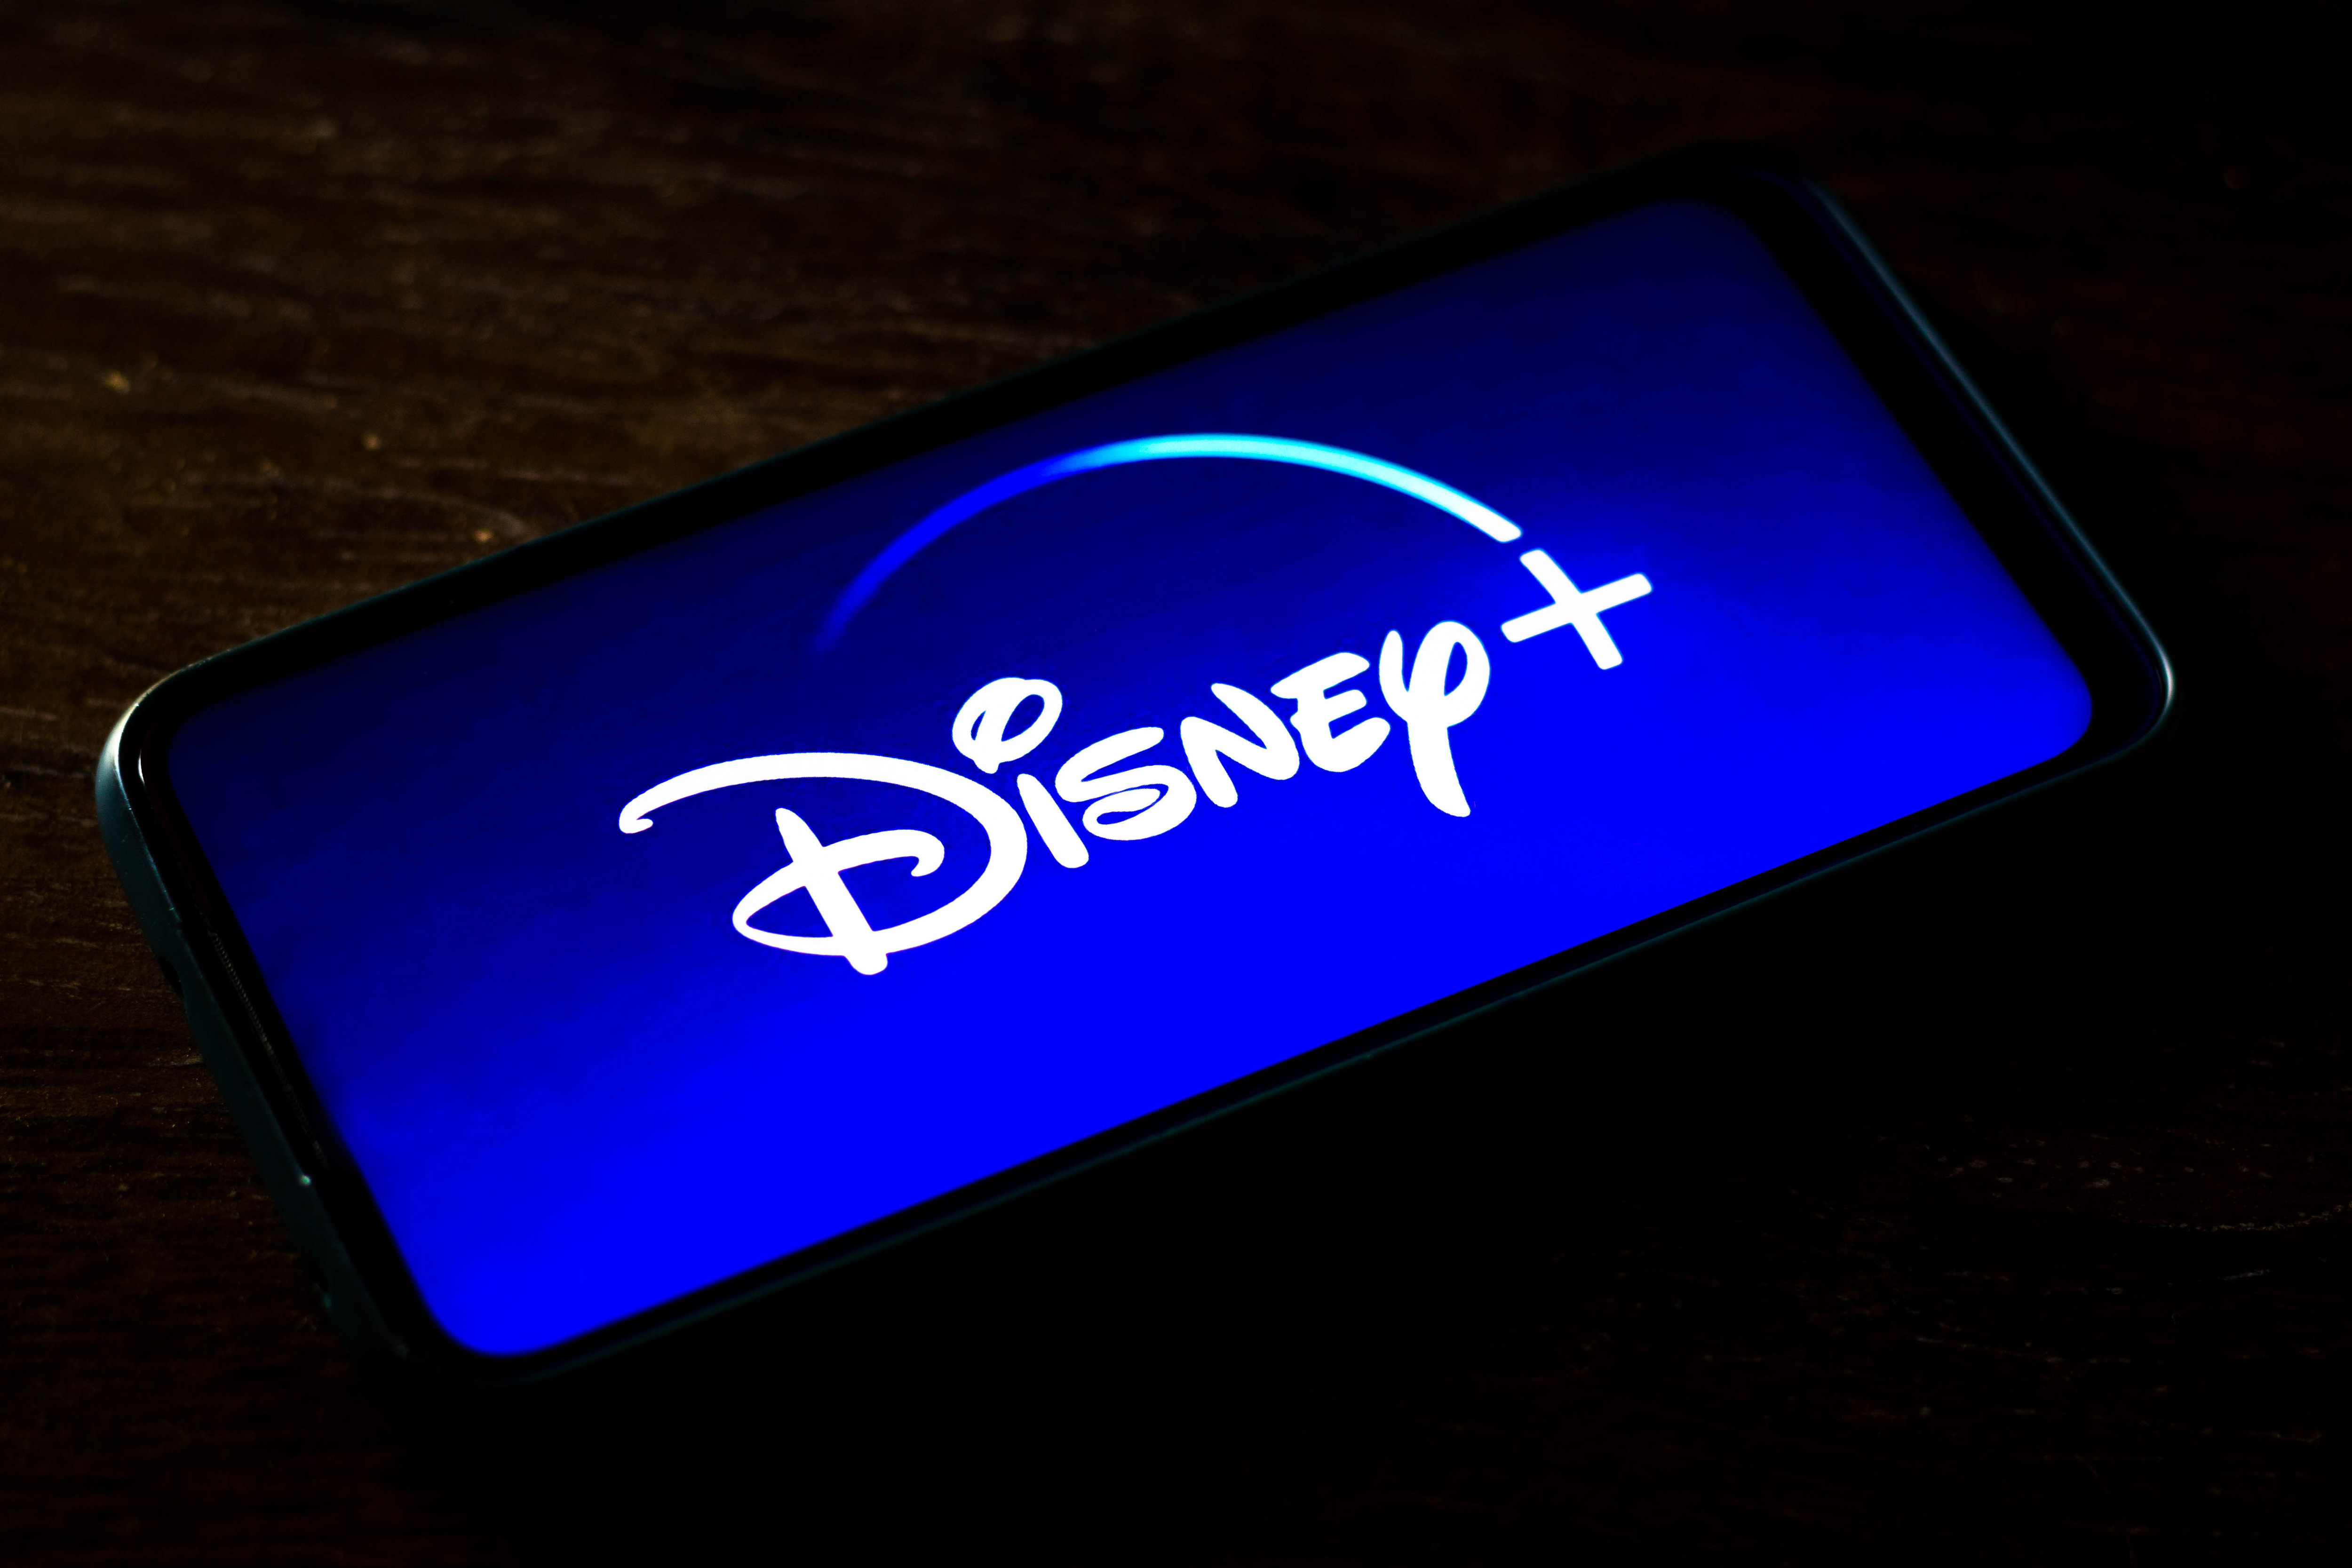 Disney+ subscribers who took up the discounted offer earlier this year can expect a price rise soon